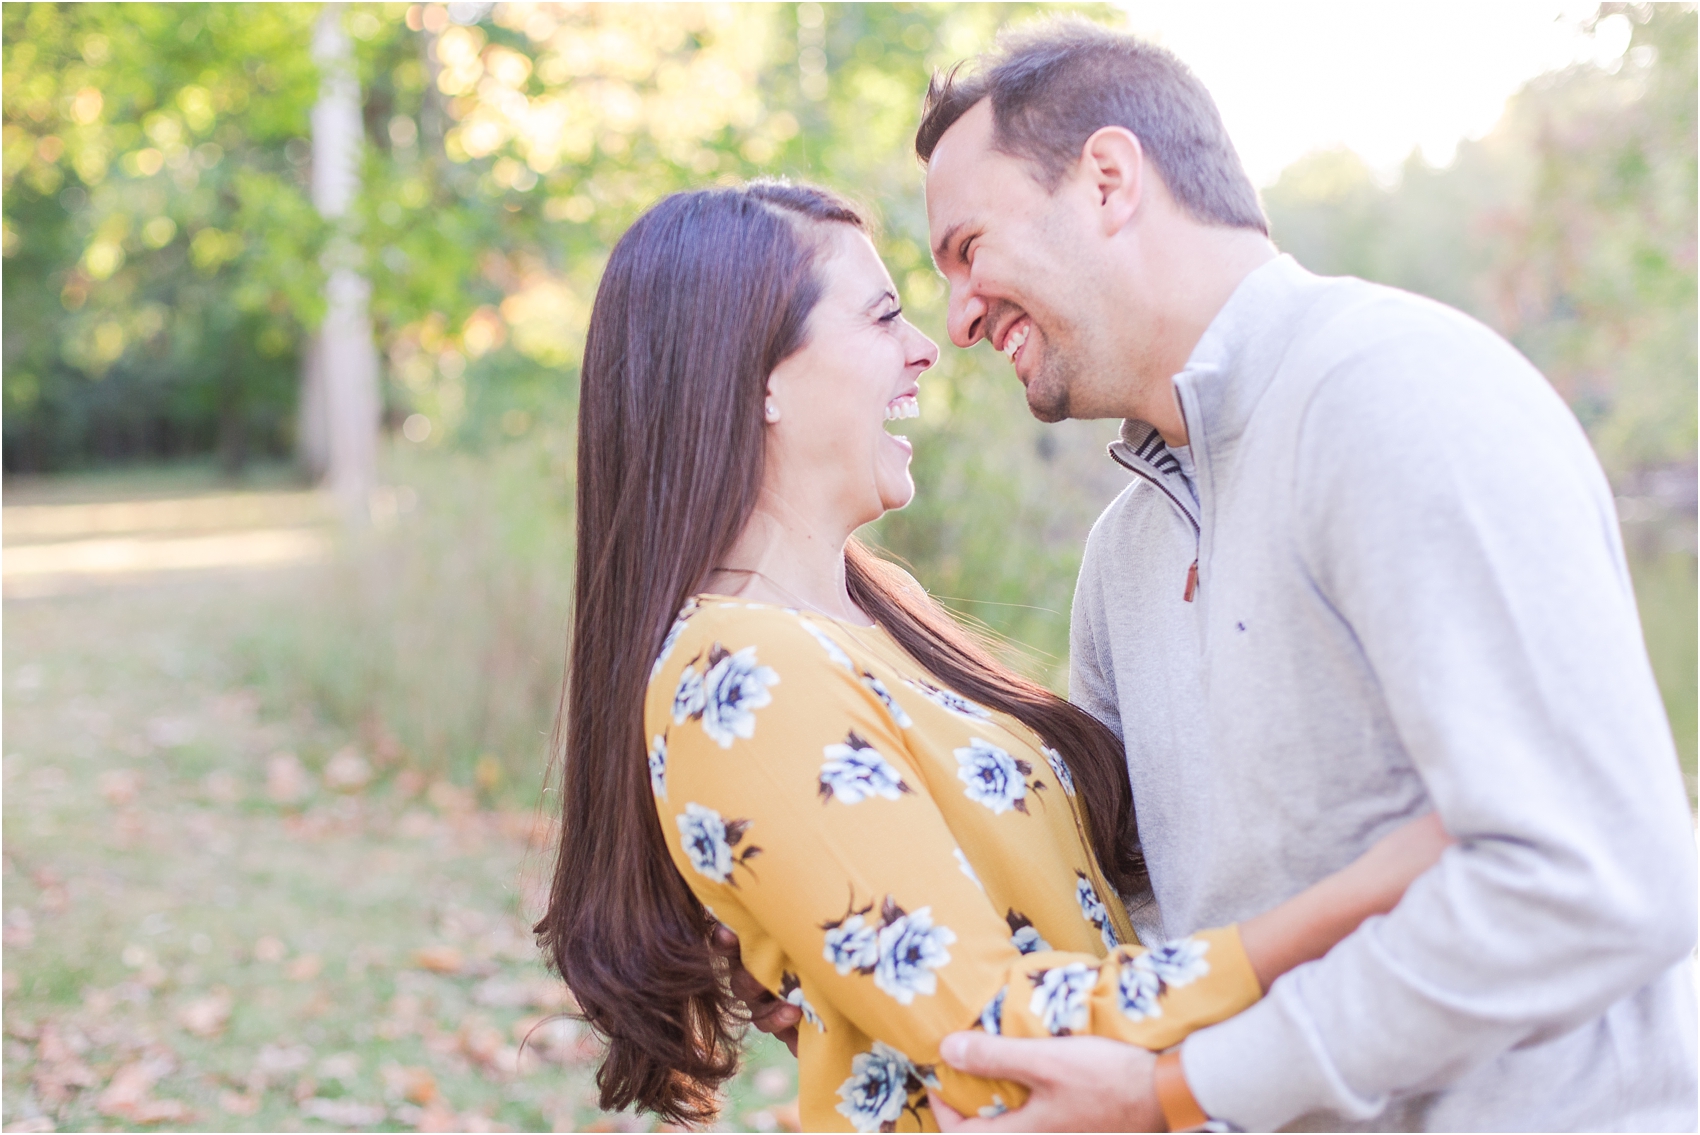 relaxed-autumn-engagement-photos-at-hudson-mills-metropark-in-dexter-mi-by-courtney-carolyn-photography_0032.jpg